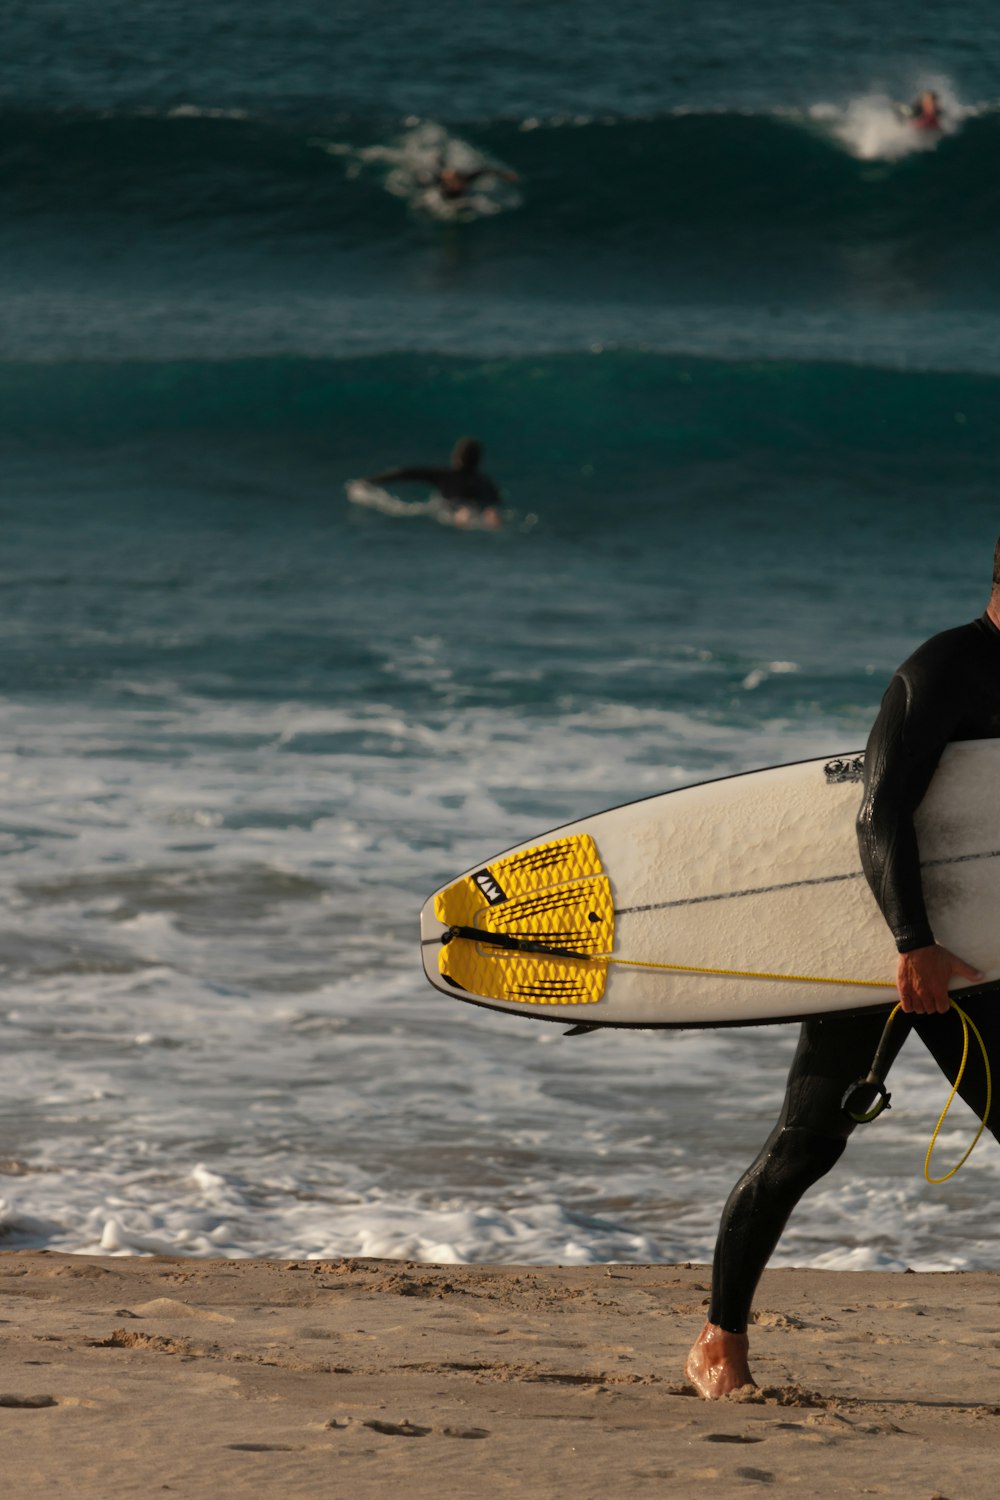 a man in a wet suit carrying a surfboard